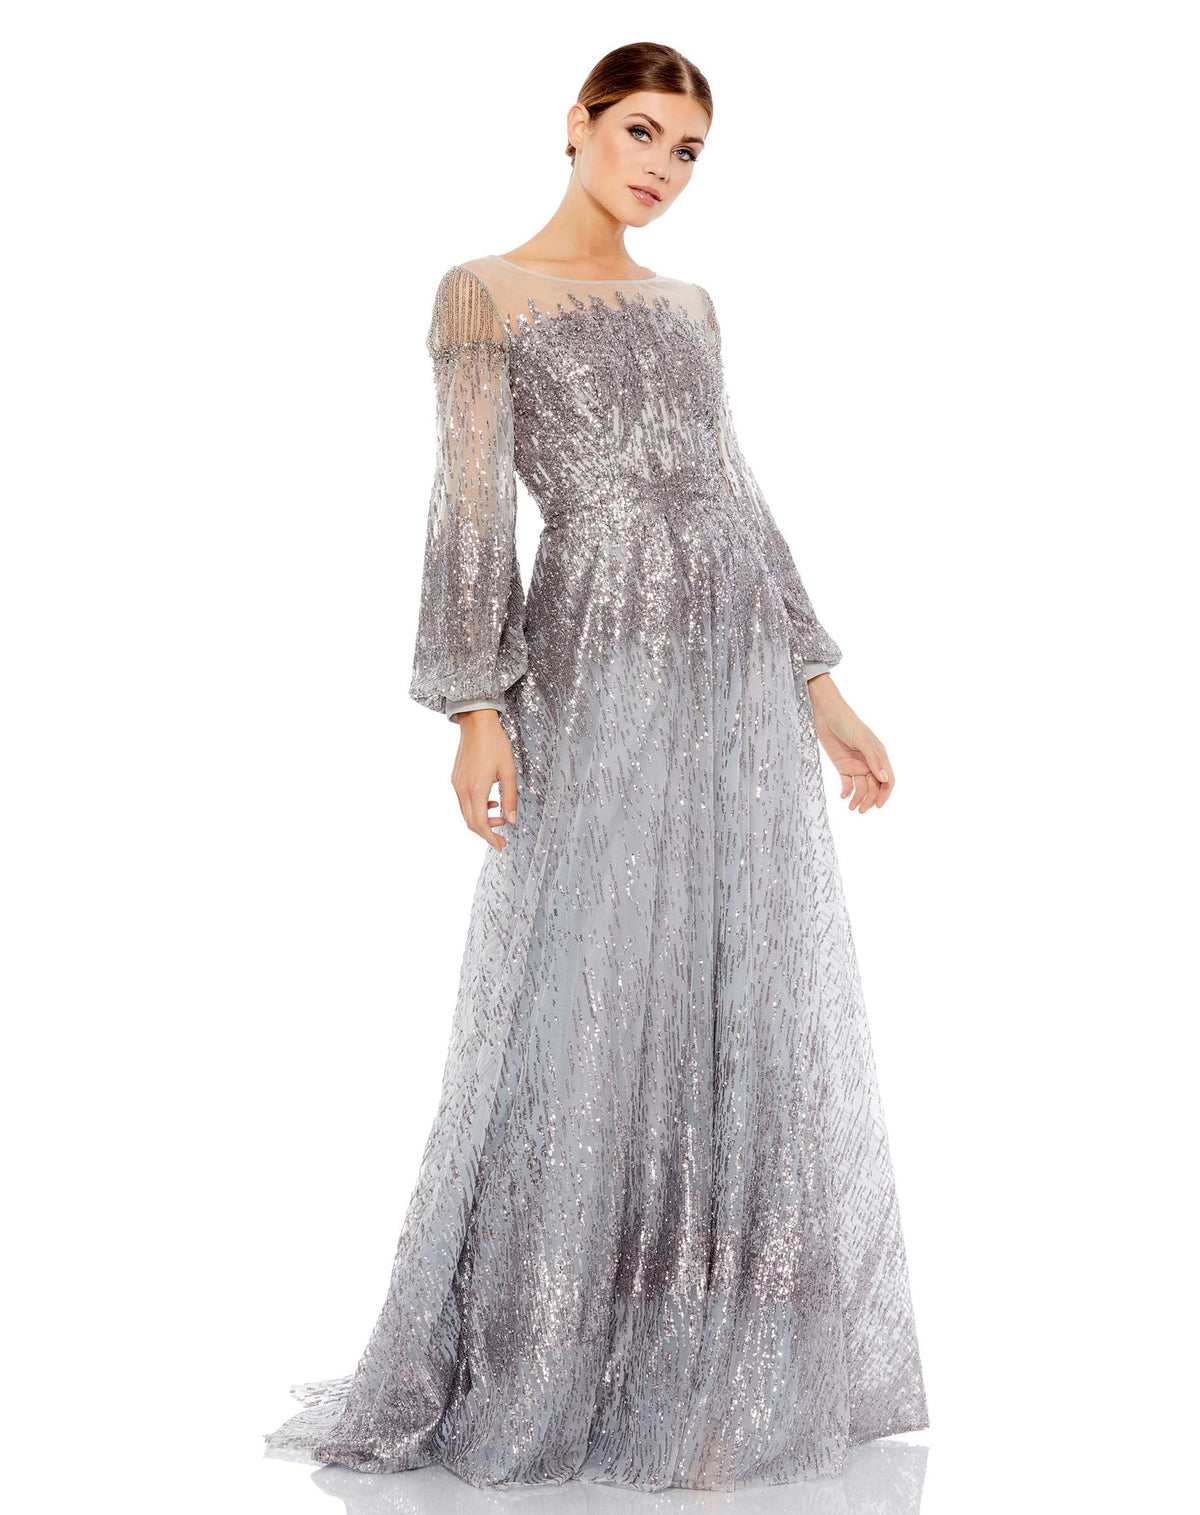 Jewel encrusted long sleeve A line modest gown - Platinum